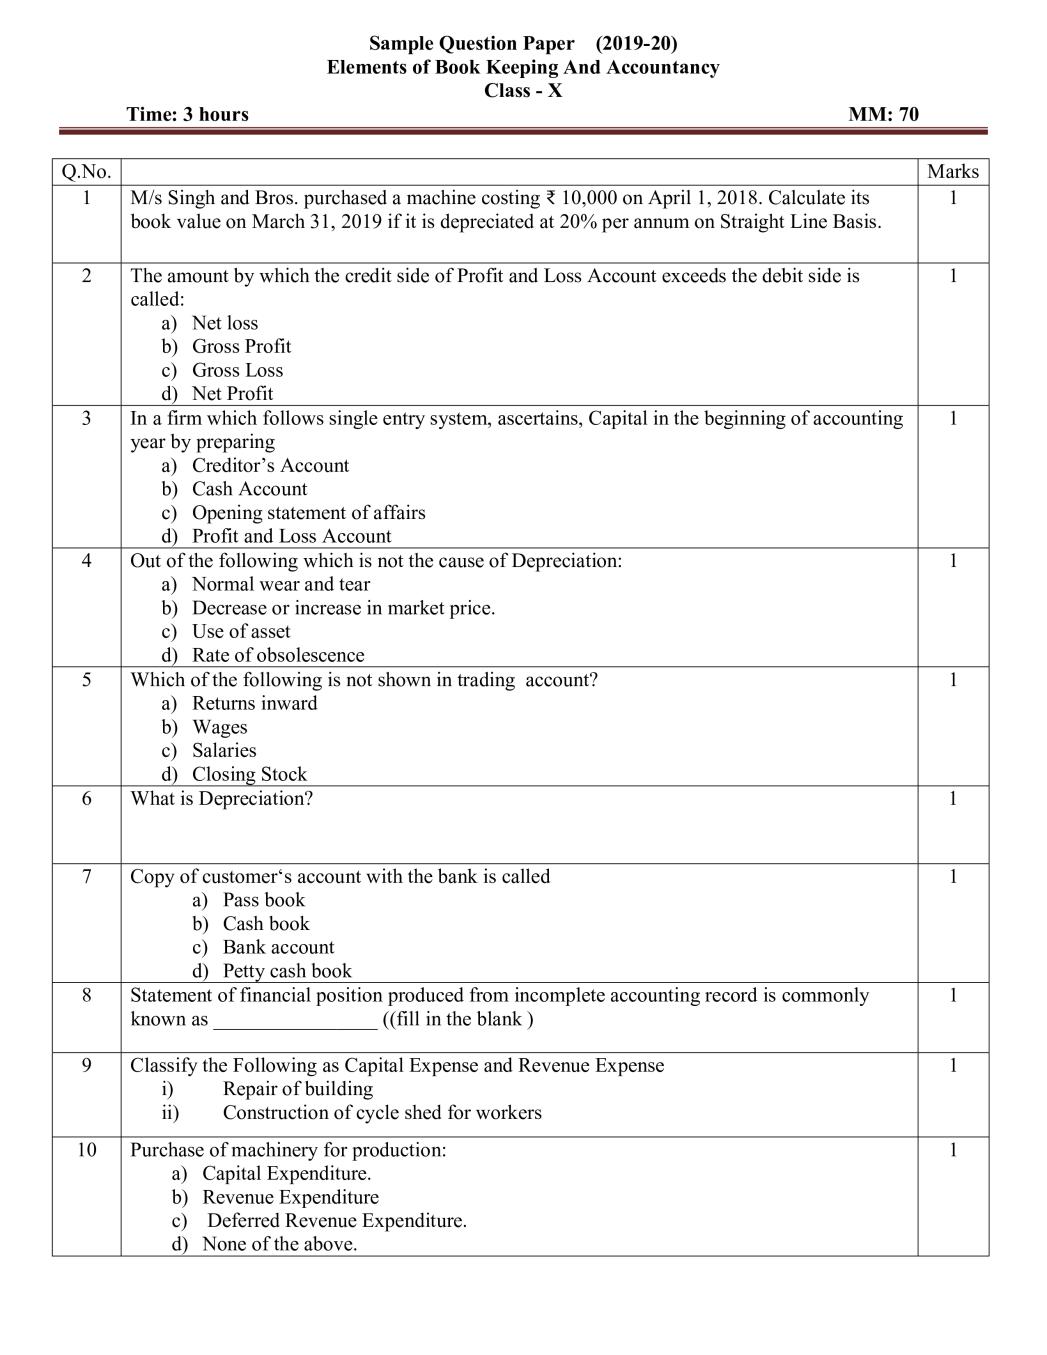 CBSE Class 10 Sample Paper 2020 for Elements of Book Keeping and Accountancy - Page 1